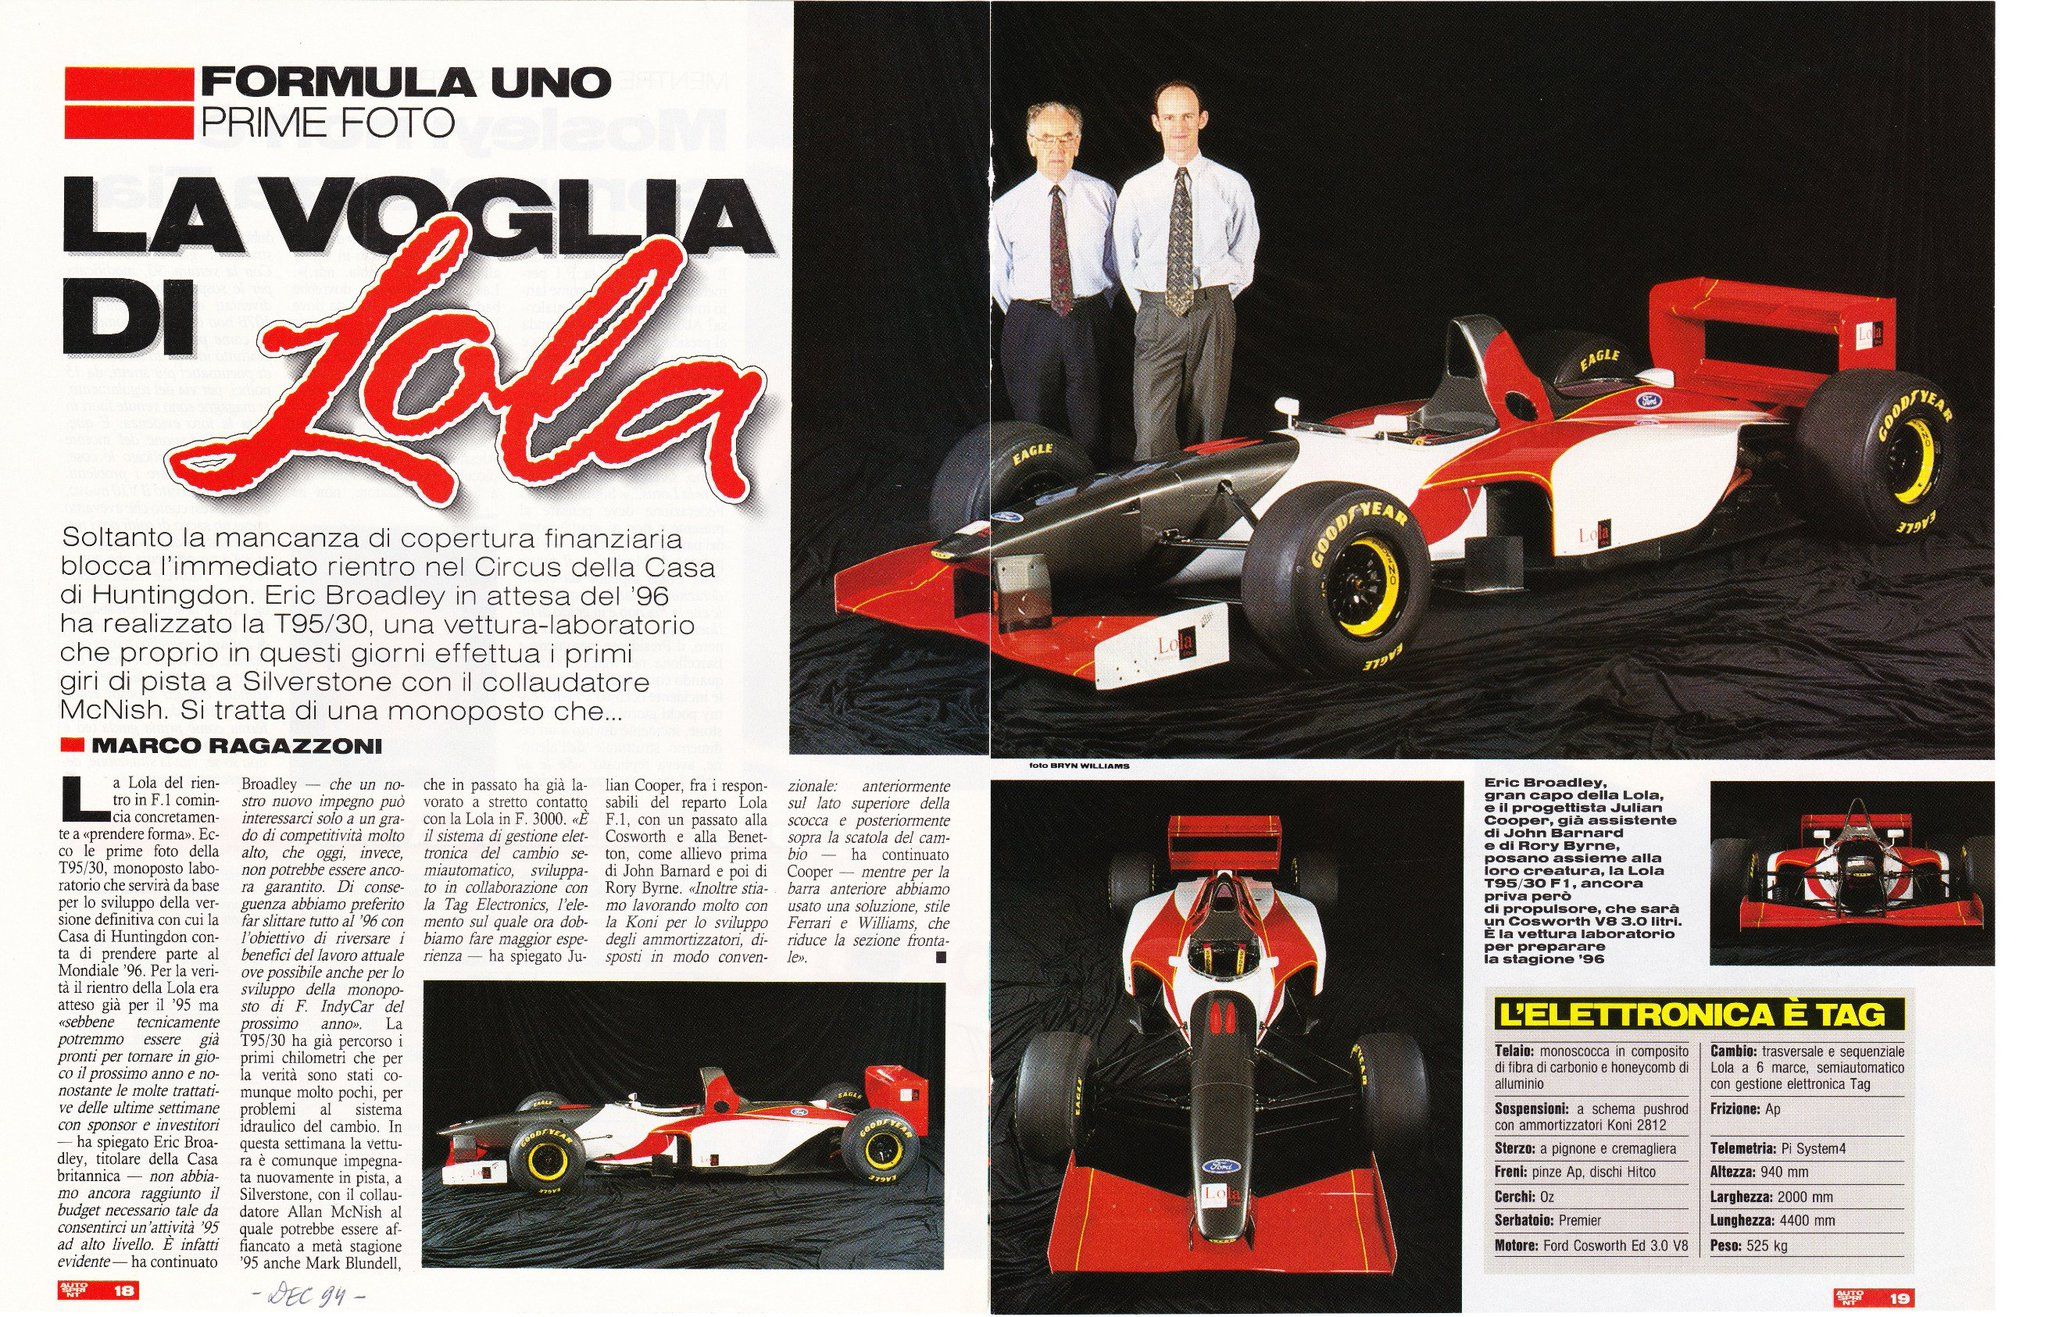 The Lola T95 was as test car preparing for F1 entry.